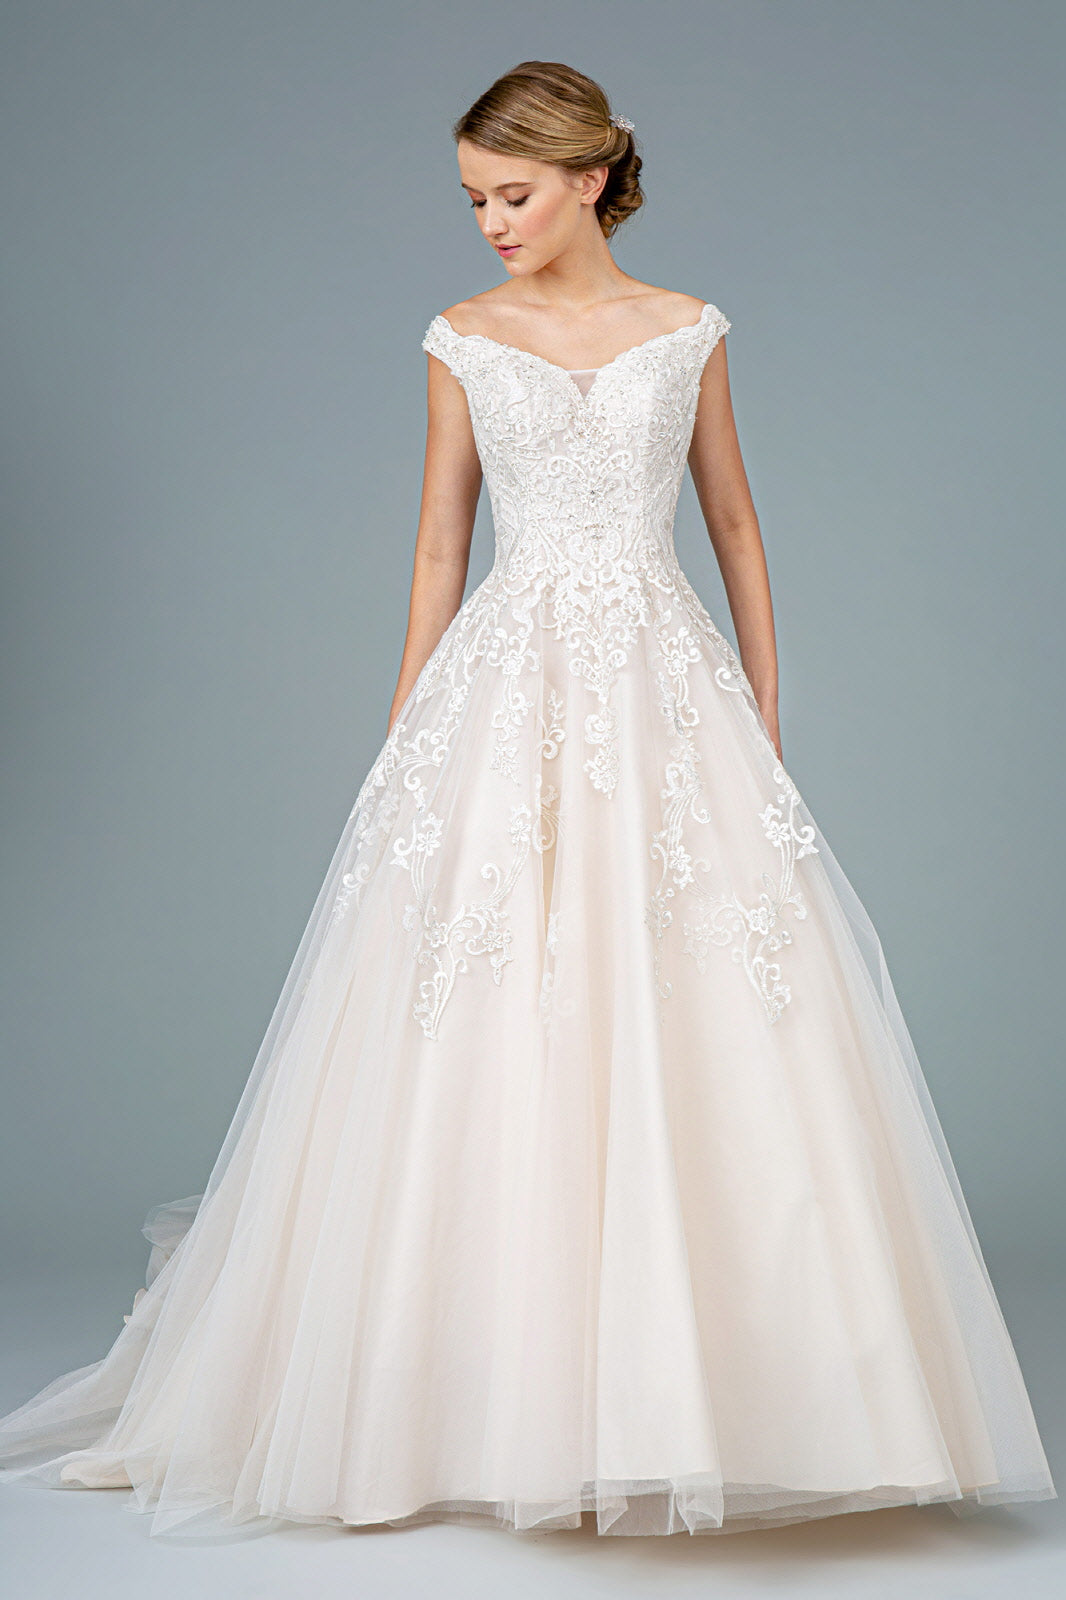 Embroidery Embellished Mesh A-Line Wedding Gown Tail GLGL1800-WEDDING GOWNS-smcfashion.com